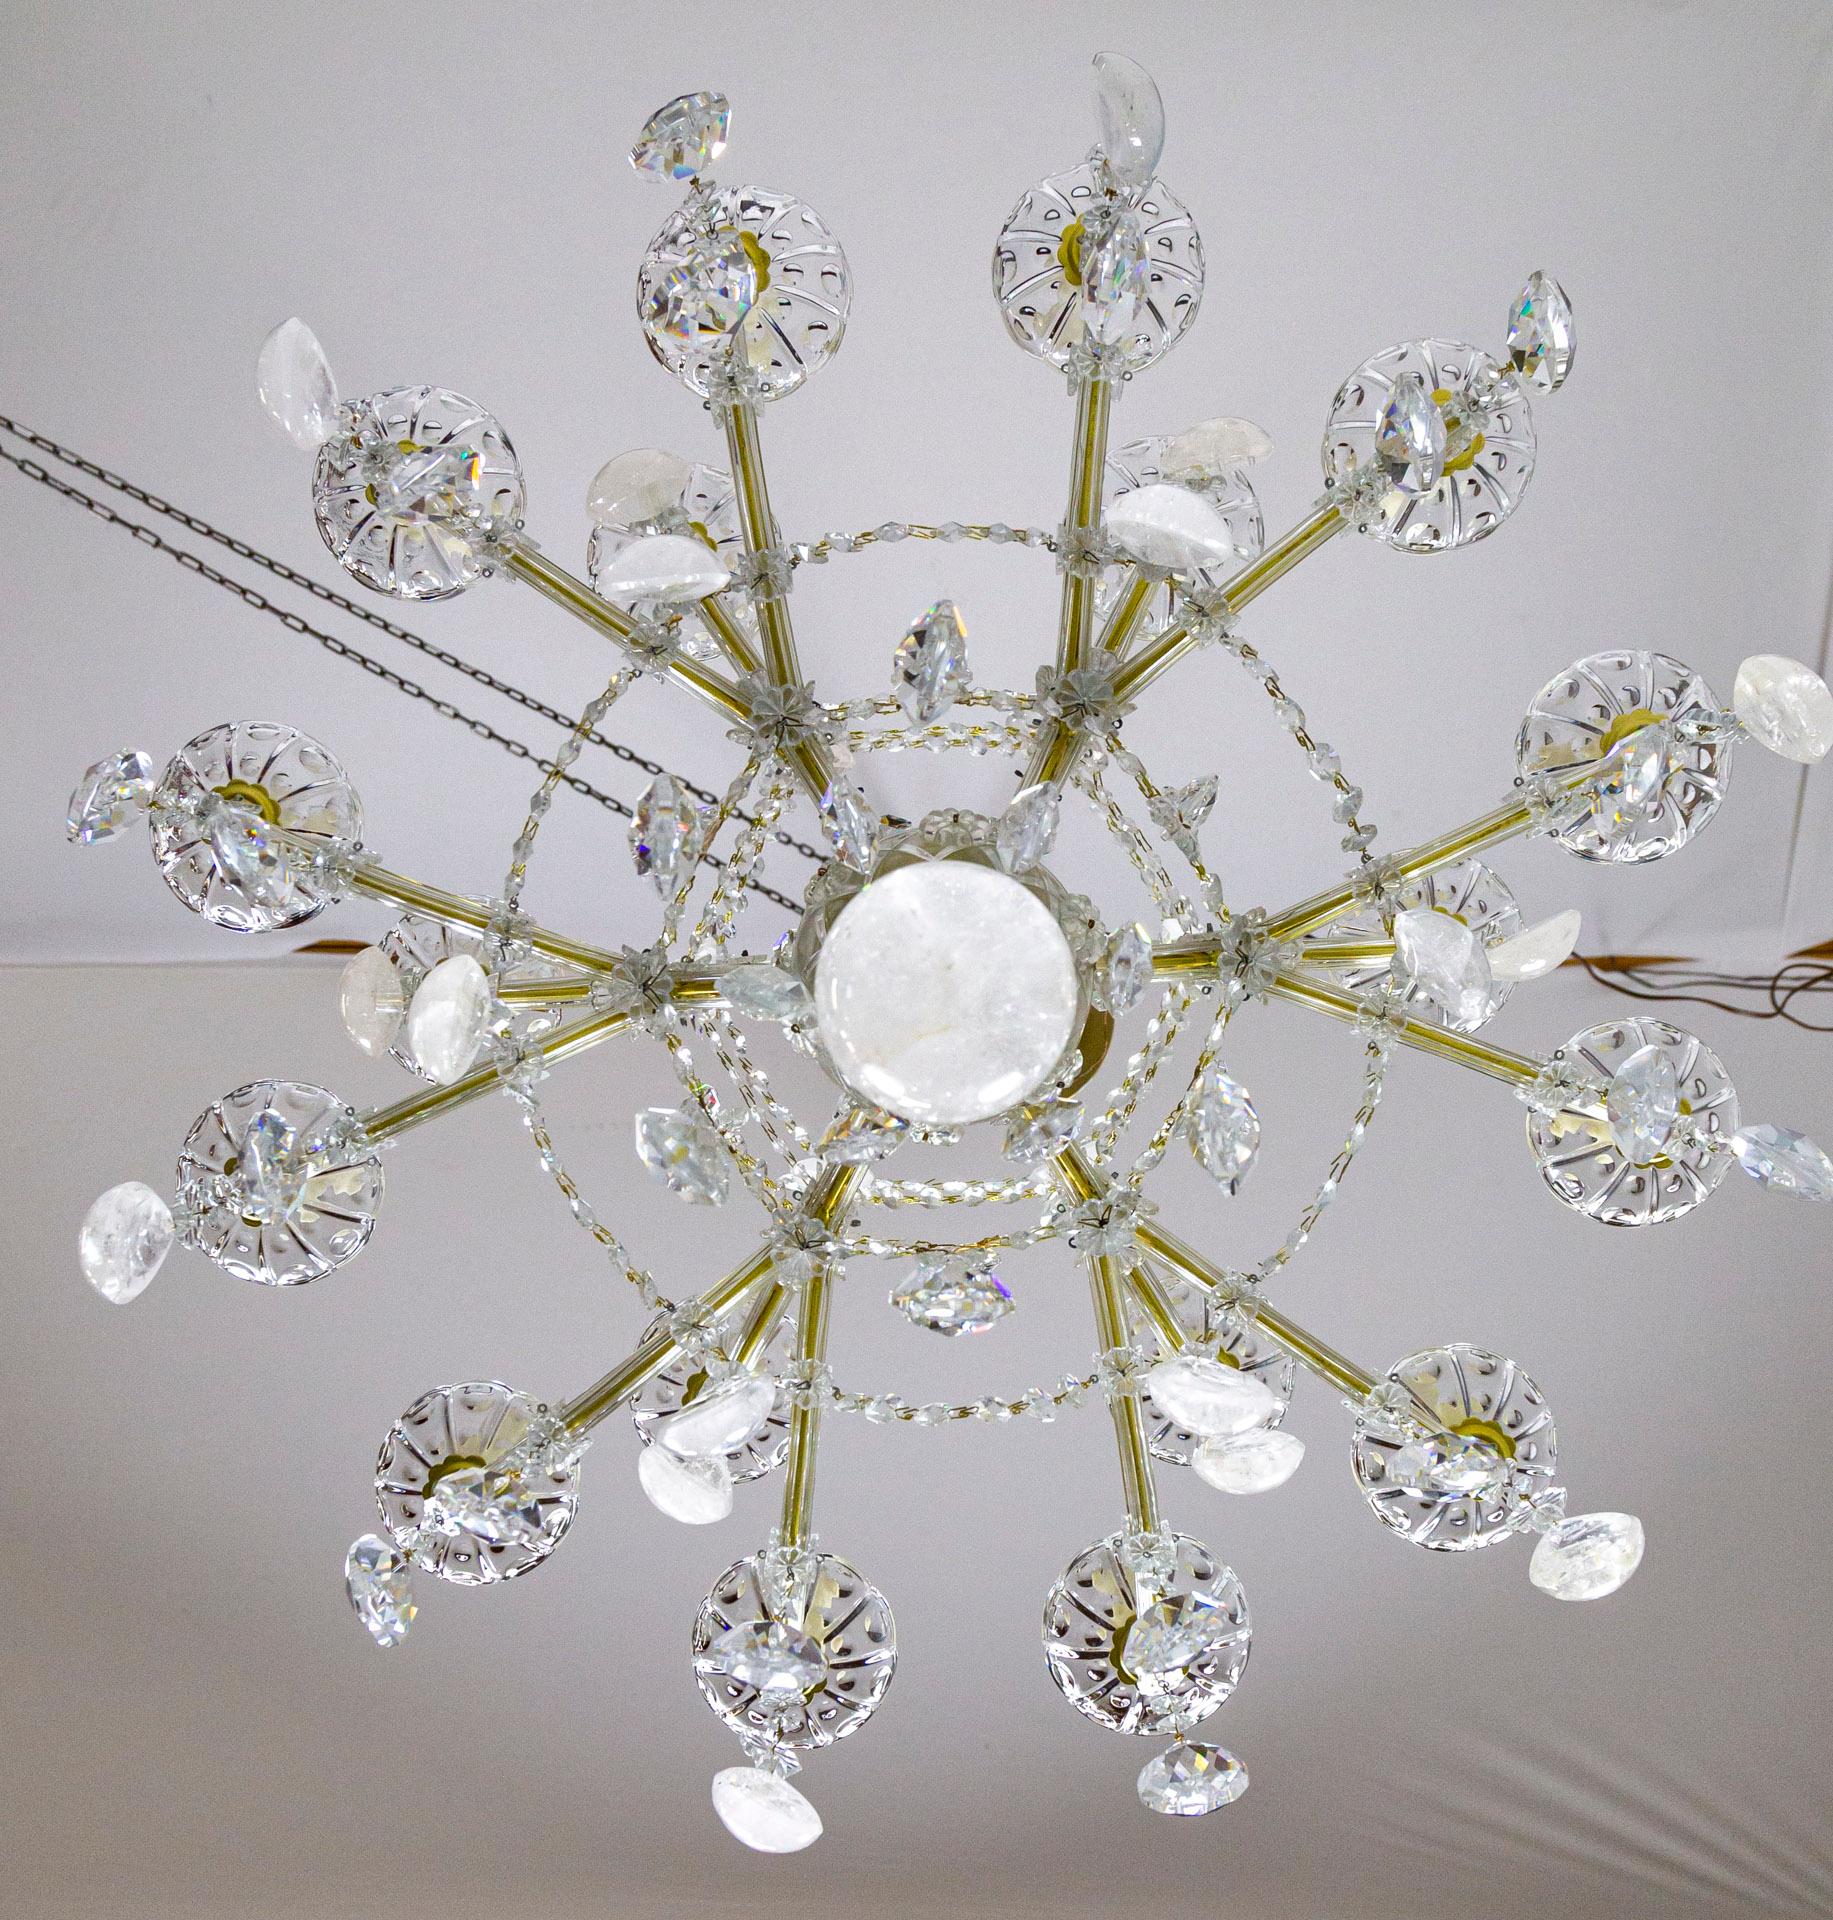 19-Light Rock Crystal Maria Theresa Chandelier For Sale 10